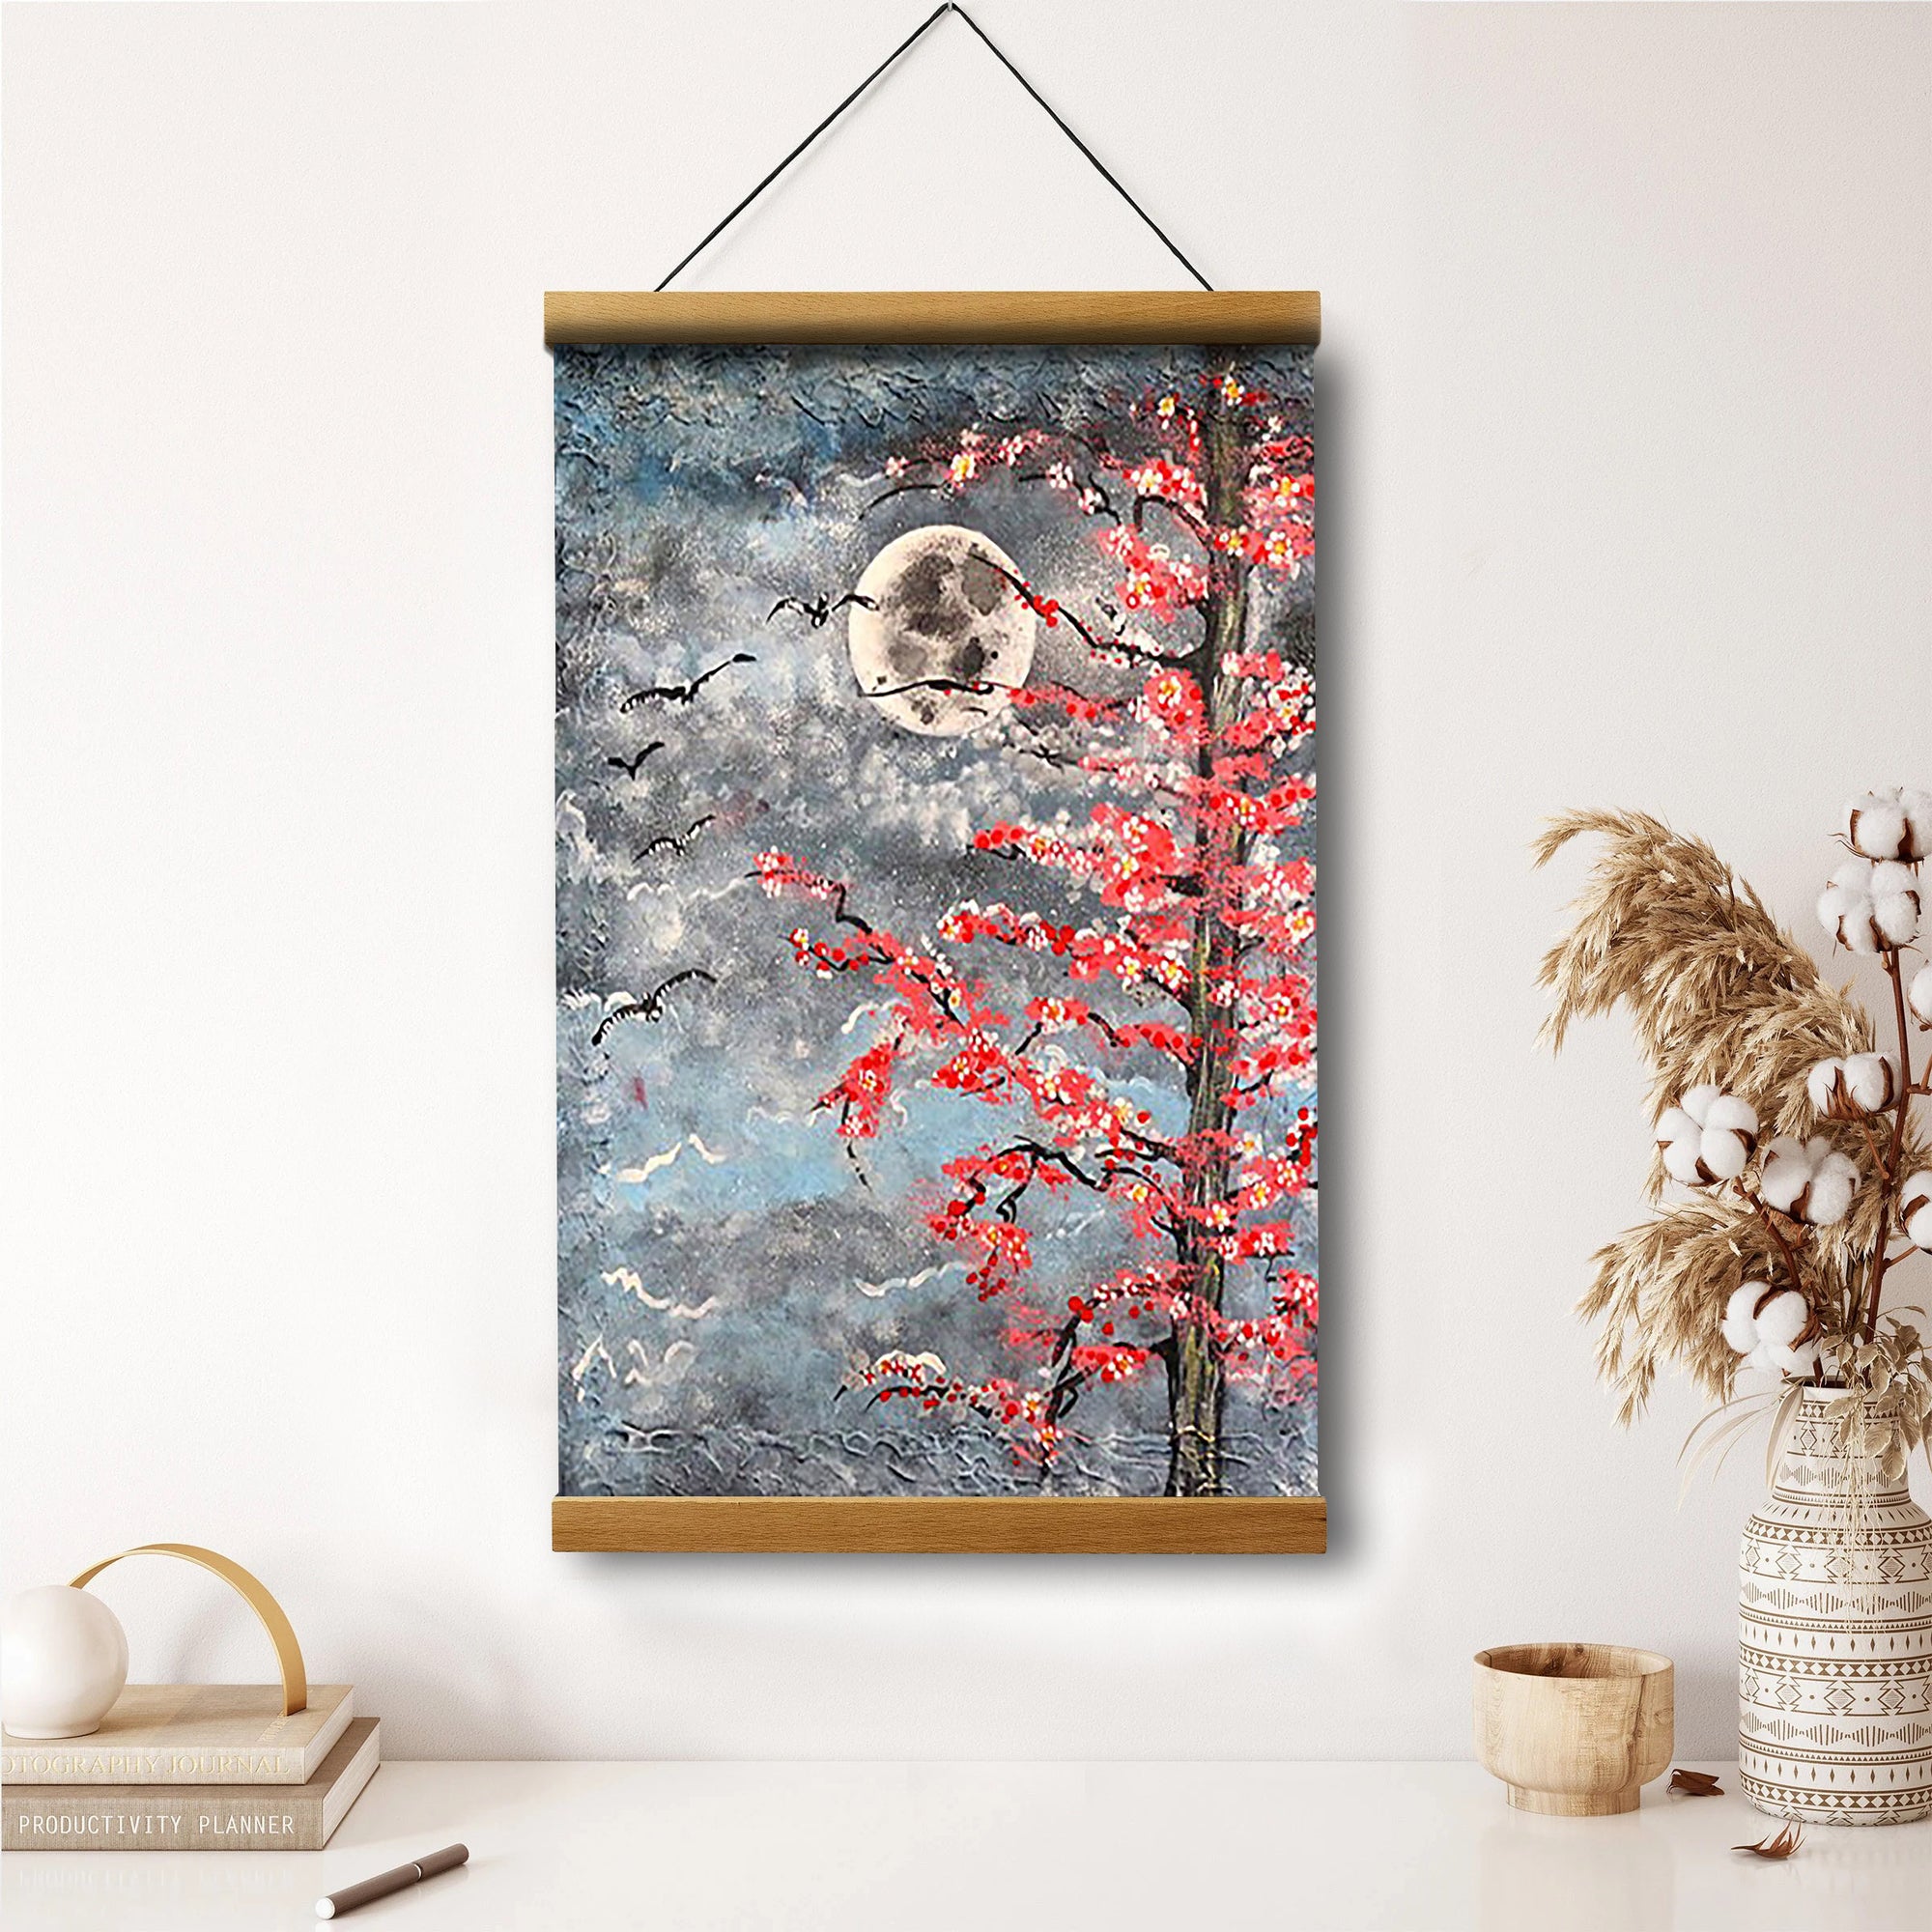 Seascape Moon Painting Hanging Canvas Wall Art - Canvas Wall Decor - Home Decor Living Room